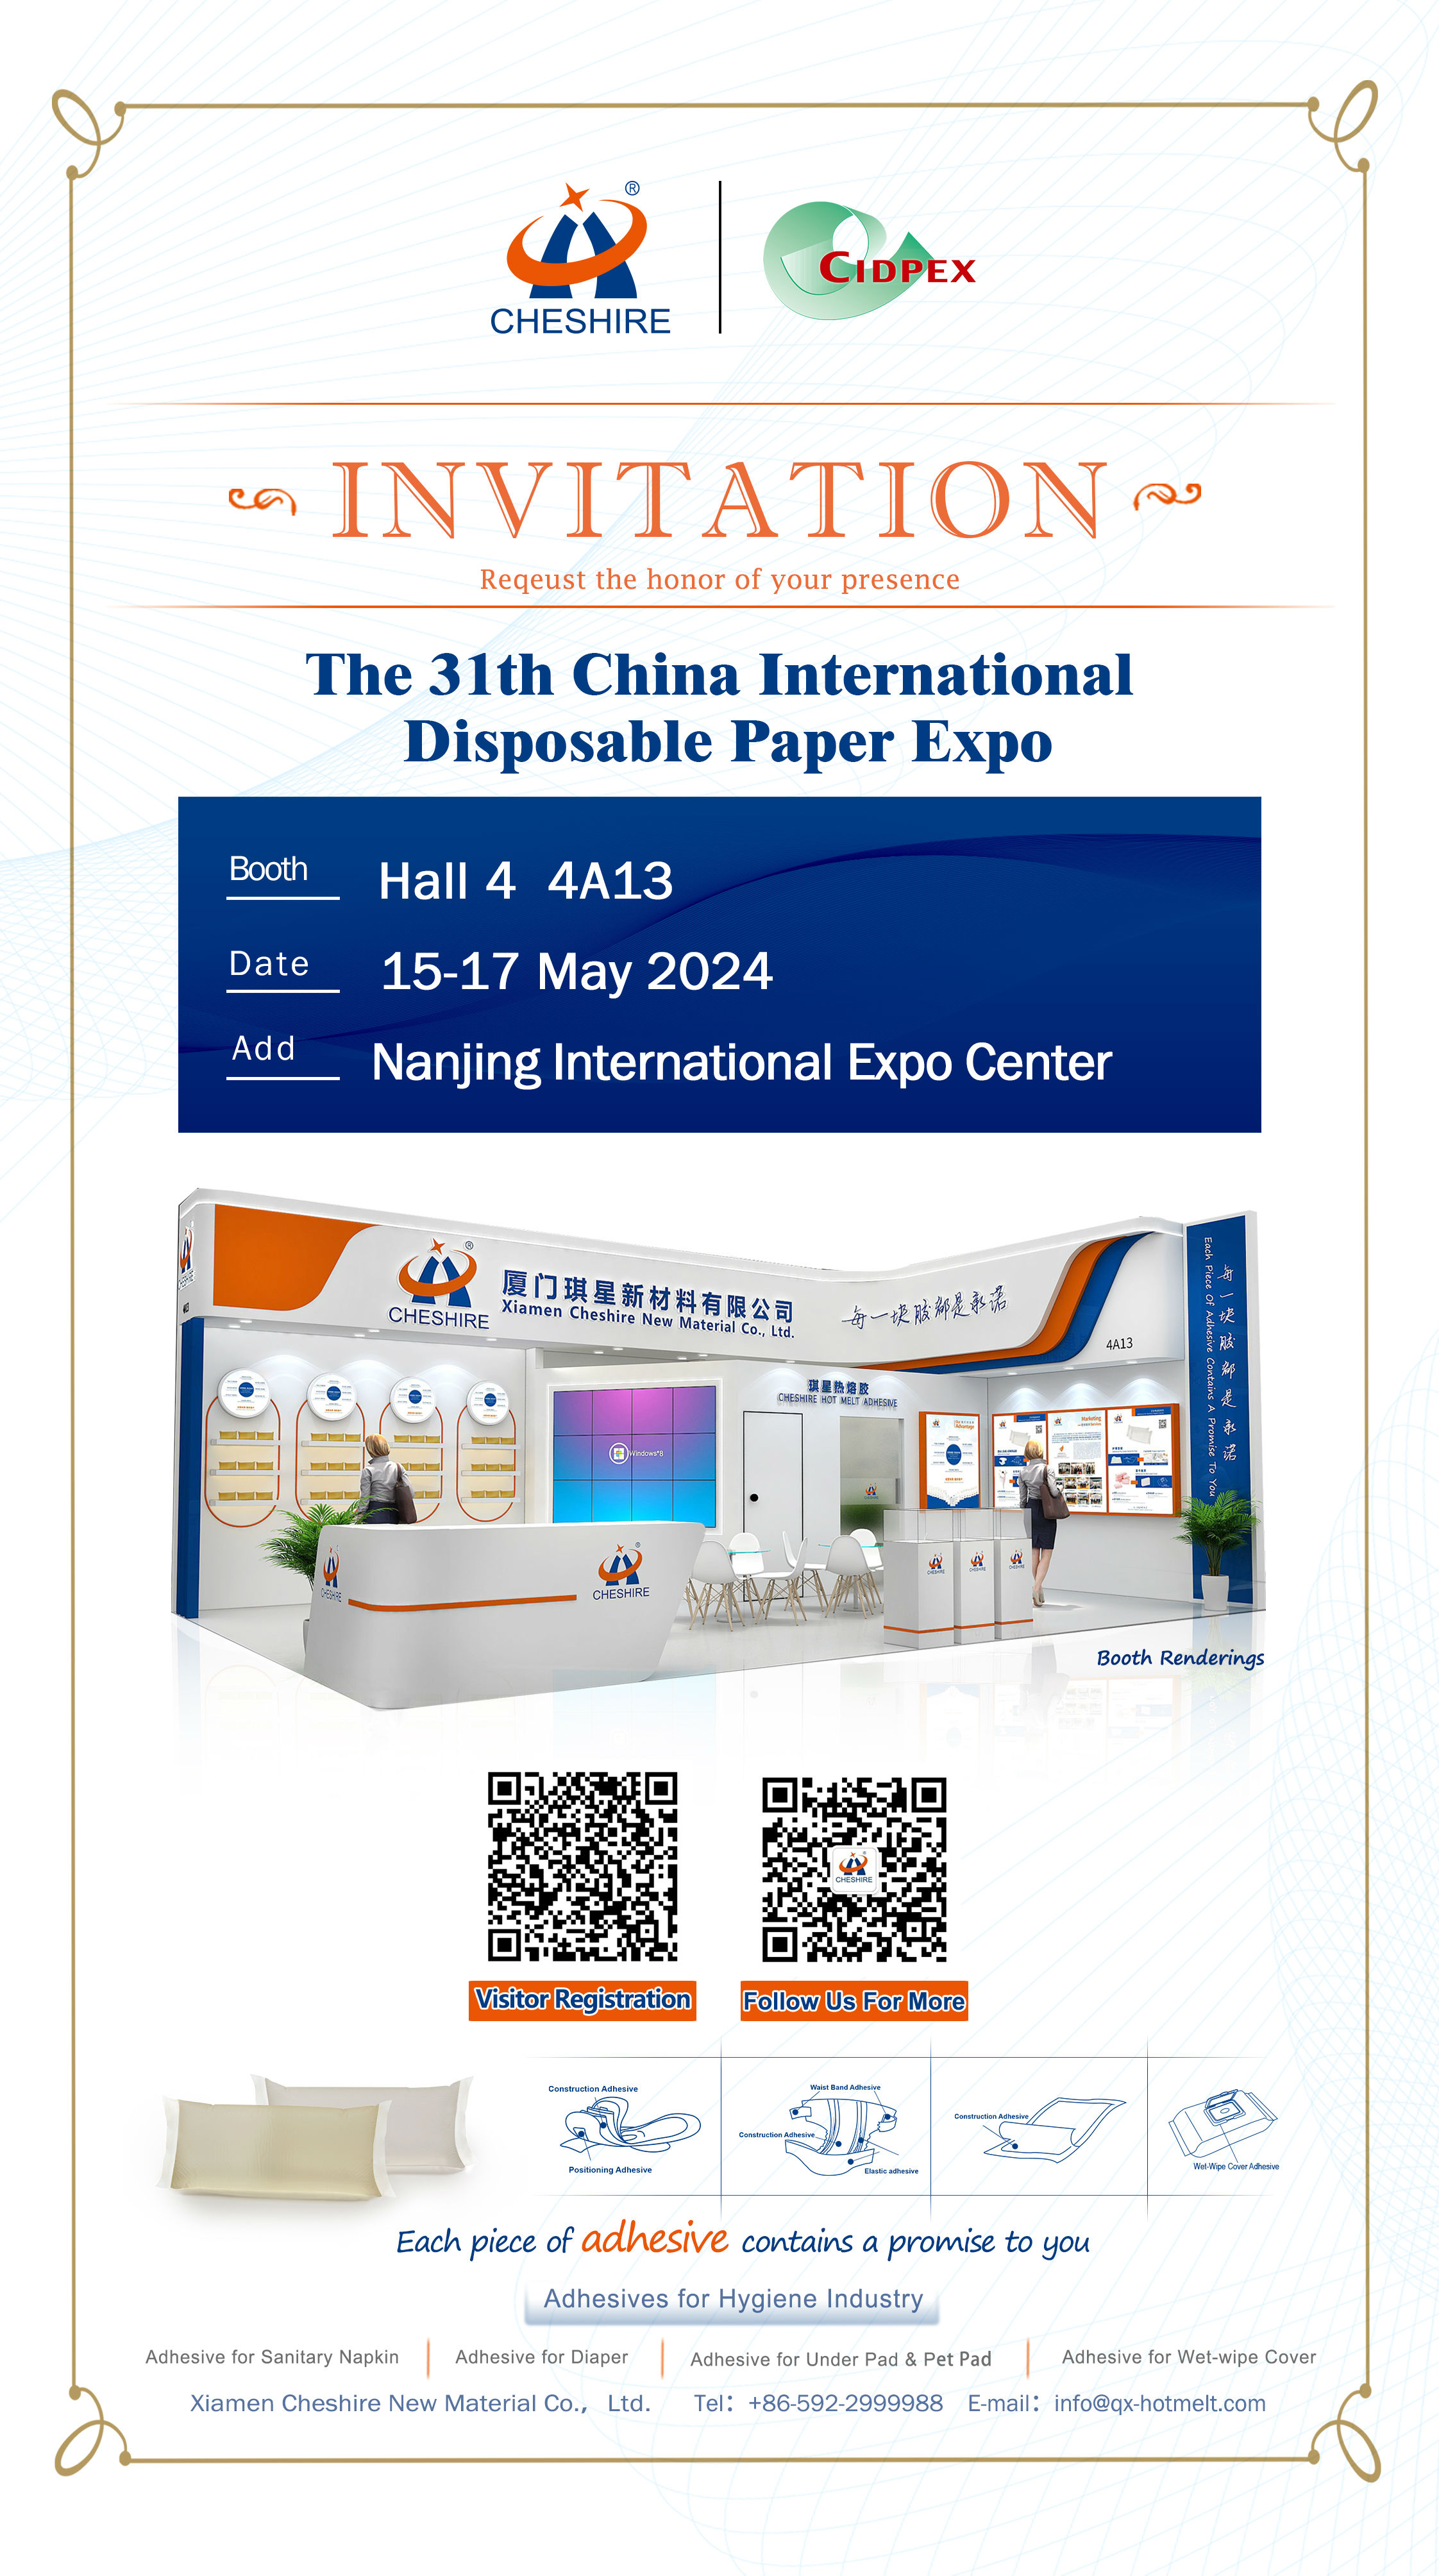 The 3lth China InternationalDisposable Paper Expo